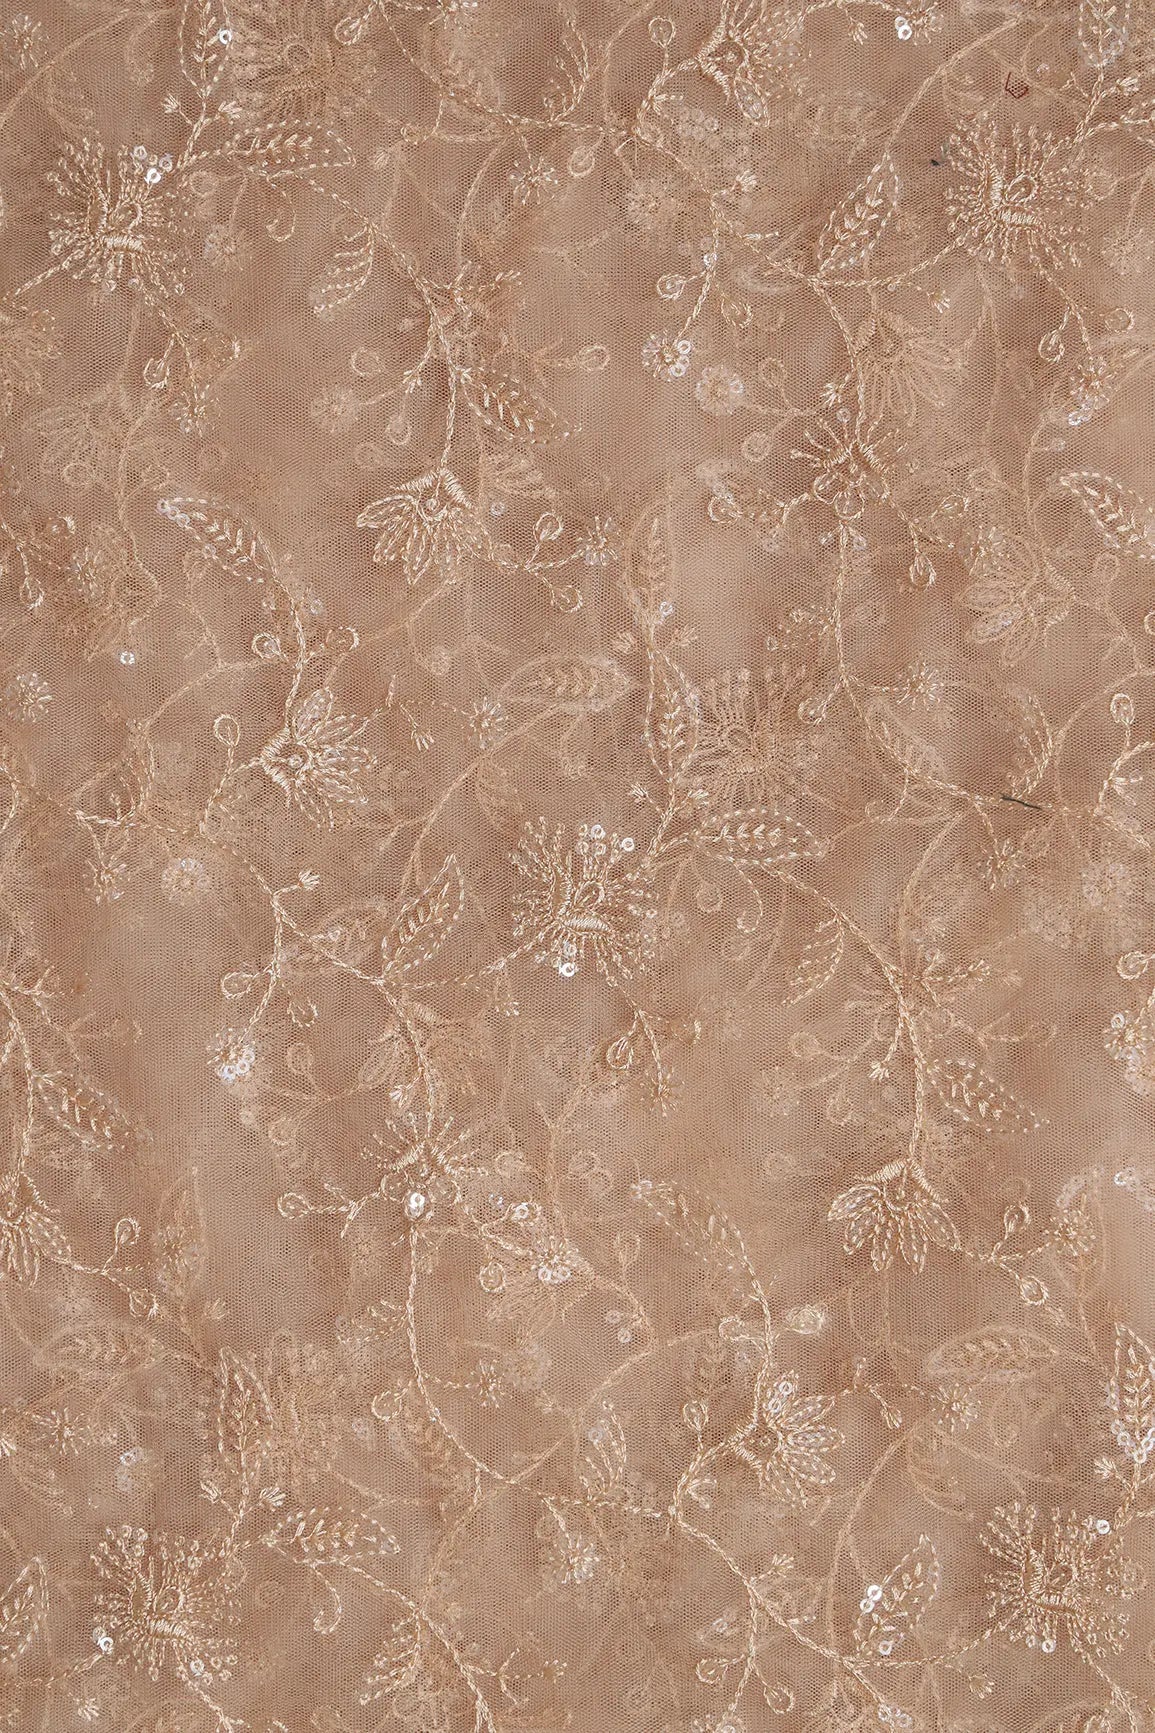 Beige Thread With Water Sequins Floral Embroidery On Beige Soft Net Fabric - doeraa